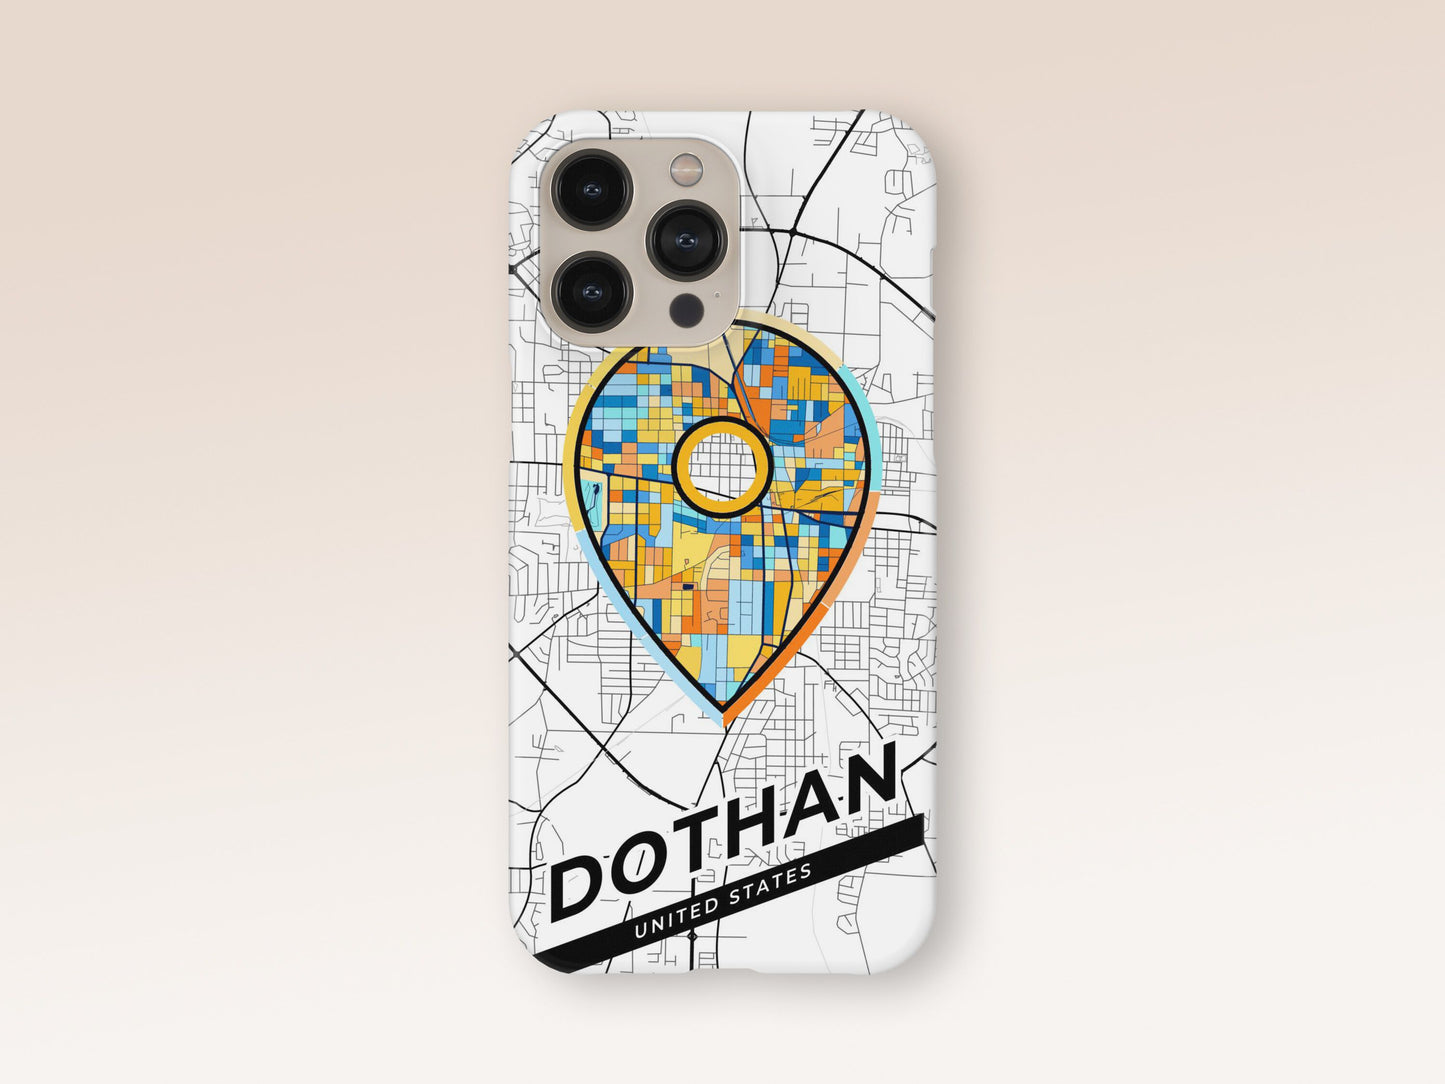 Dothan Alabama slim phone case with colorful icon. Birthday, wedding or housewarming gift. Couple match cases. 1